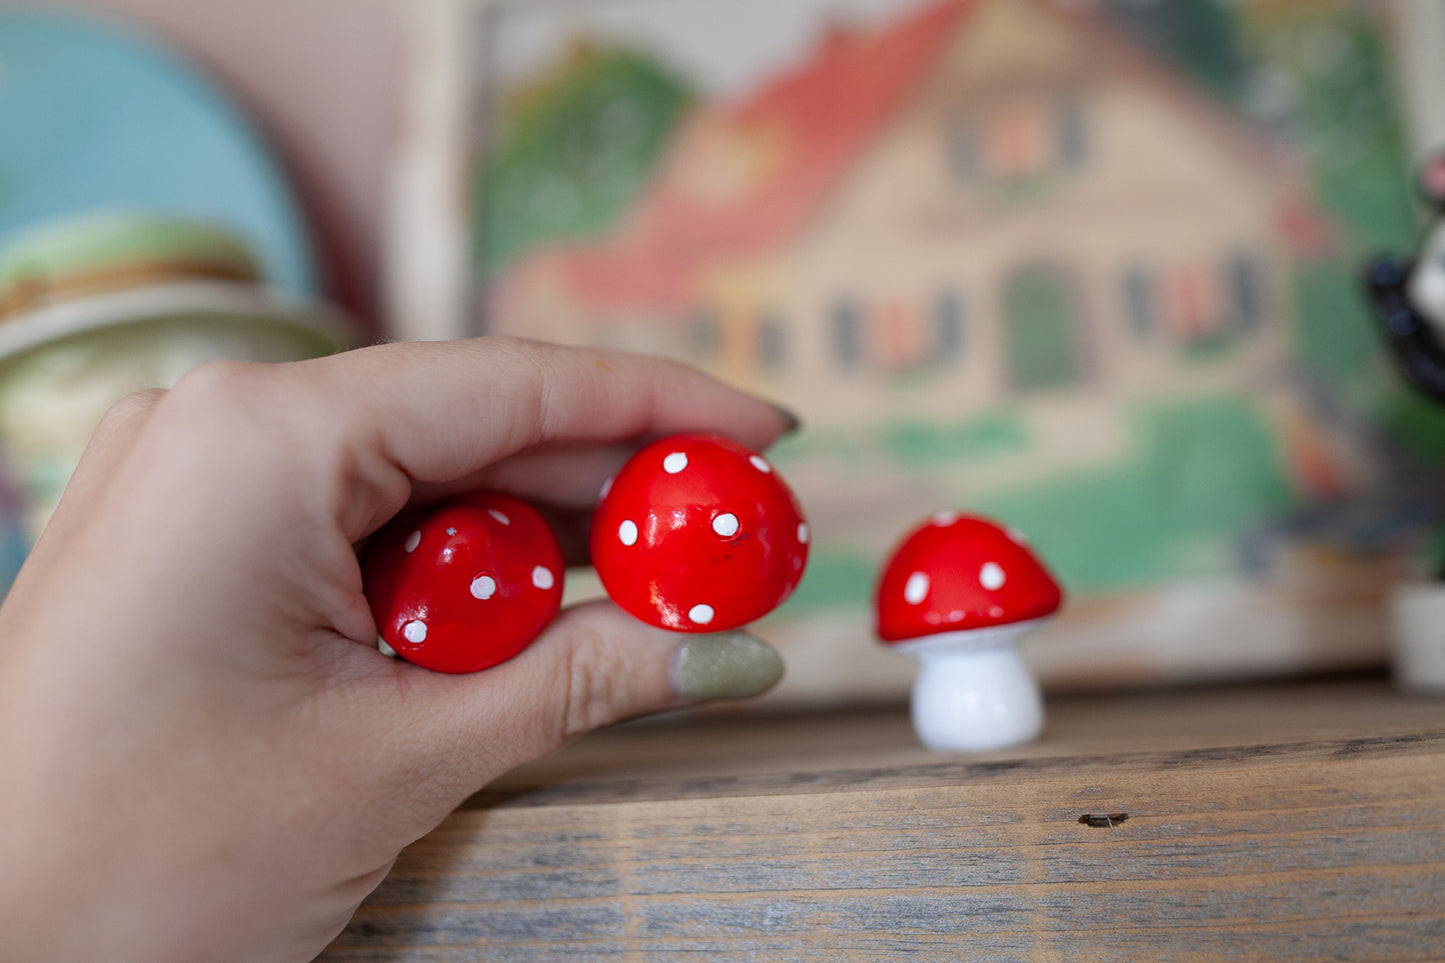 Little Red and White Mushroom Figurines